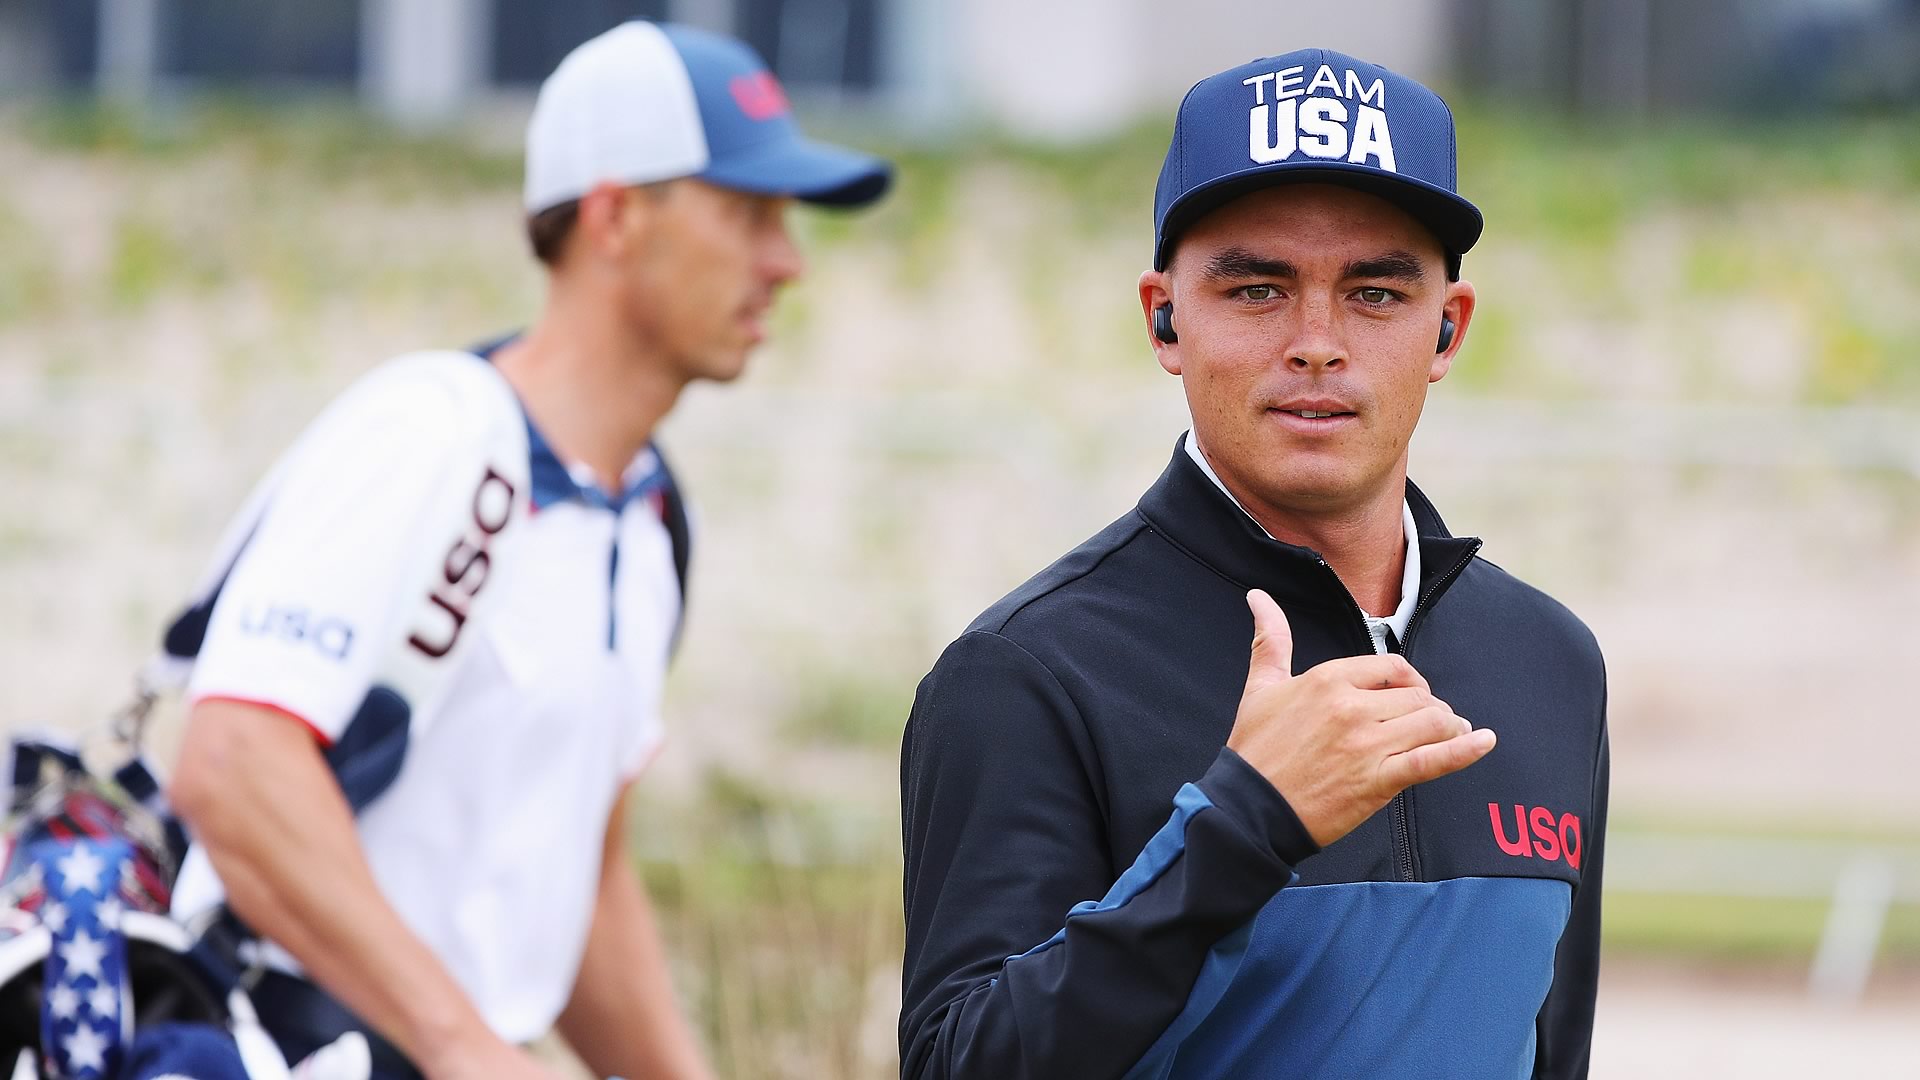 A format change for Olympic golf? Rickie Fowler has some ideas